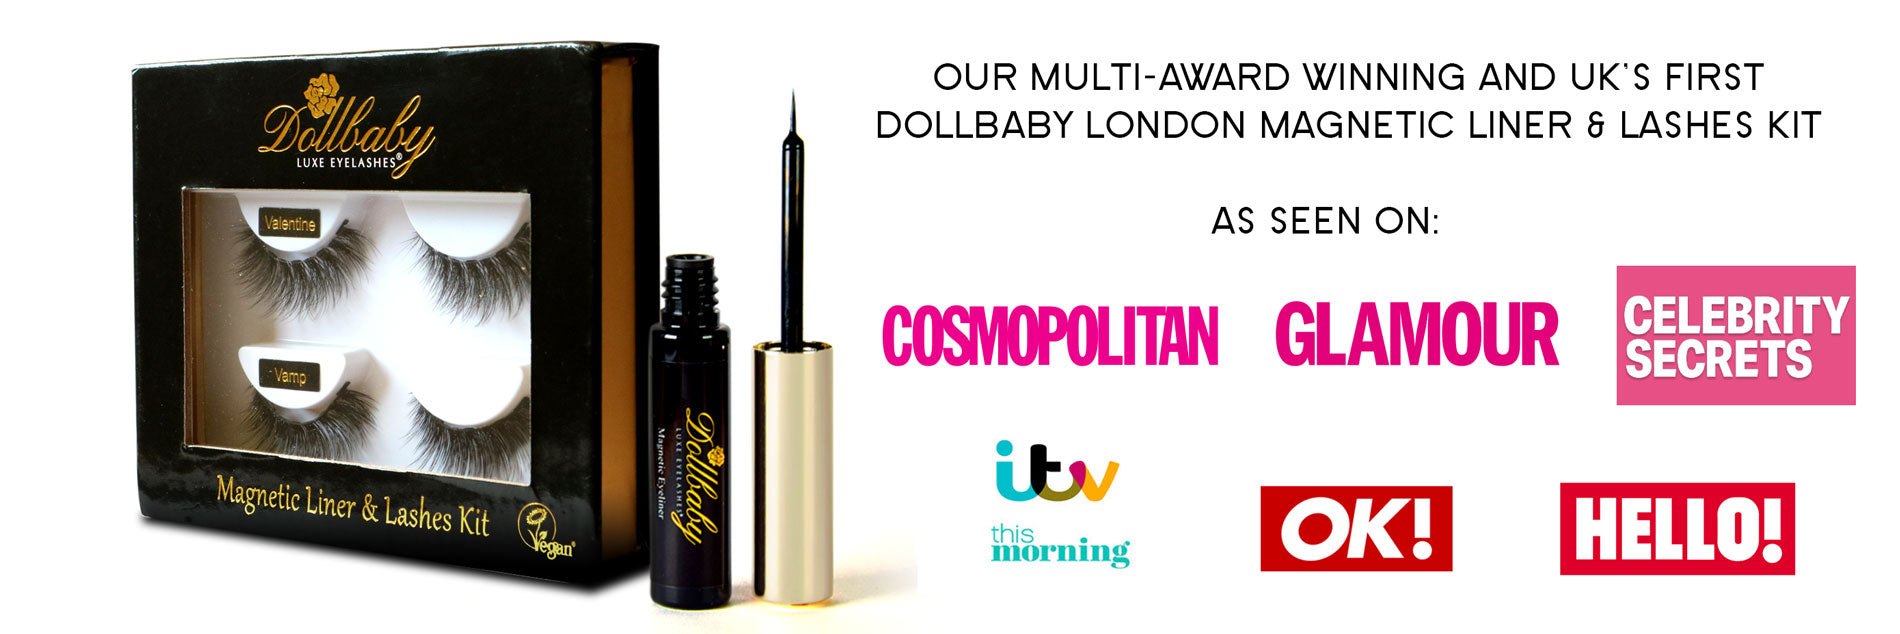 Dollbaby London Magnetic Lashes and Liner Kit Our Multi-Award Winning and UK's First Dollbaby London Magnetic Liner & Lashes Kit as Seen On Cosmopolitan, Glamour, Celebrity Secrets, ITV This Morning, OK! and Hello Magazine